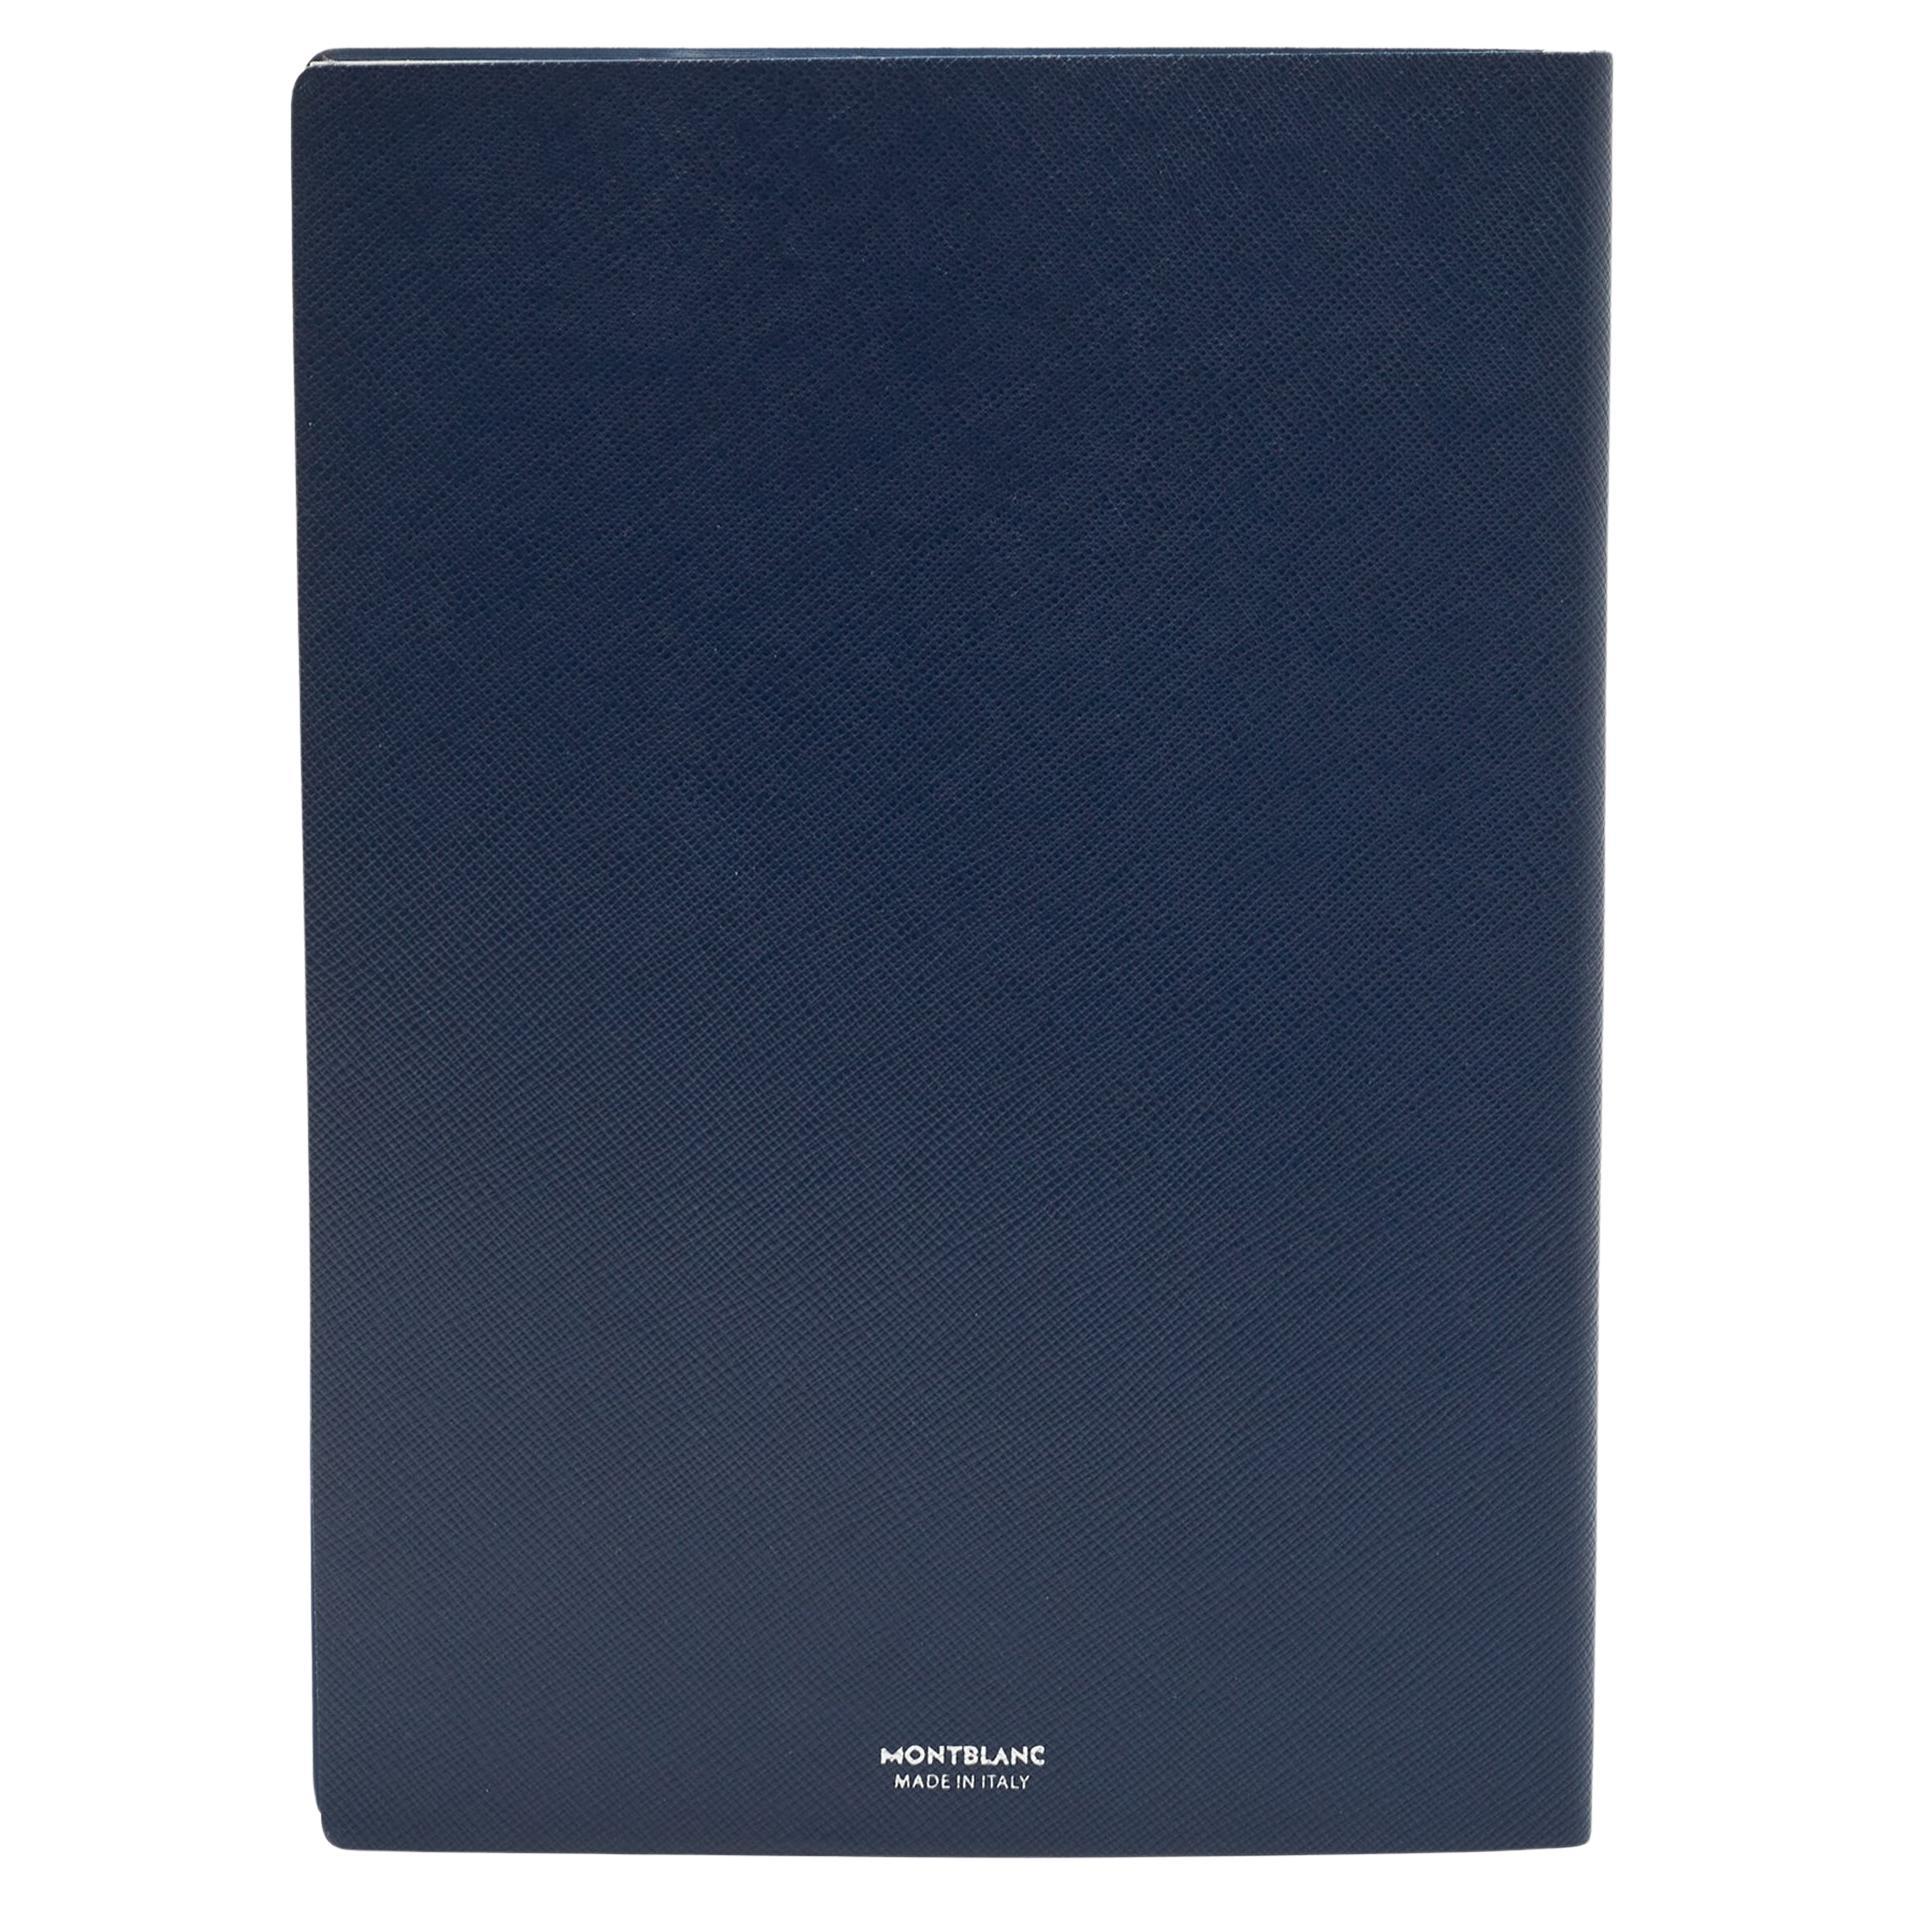 Montblanc strives to fulfill its dedication to quality and excellent craftsmanship with all its creations. This Montblanc notebook has the brand logo on the front.

